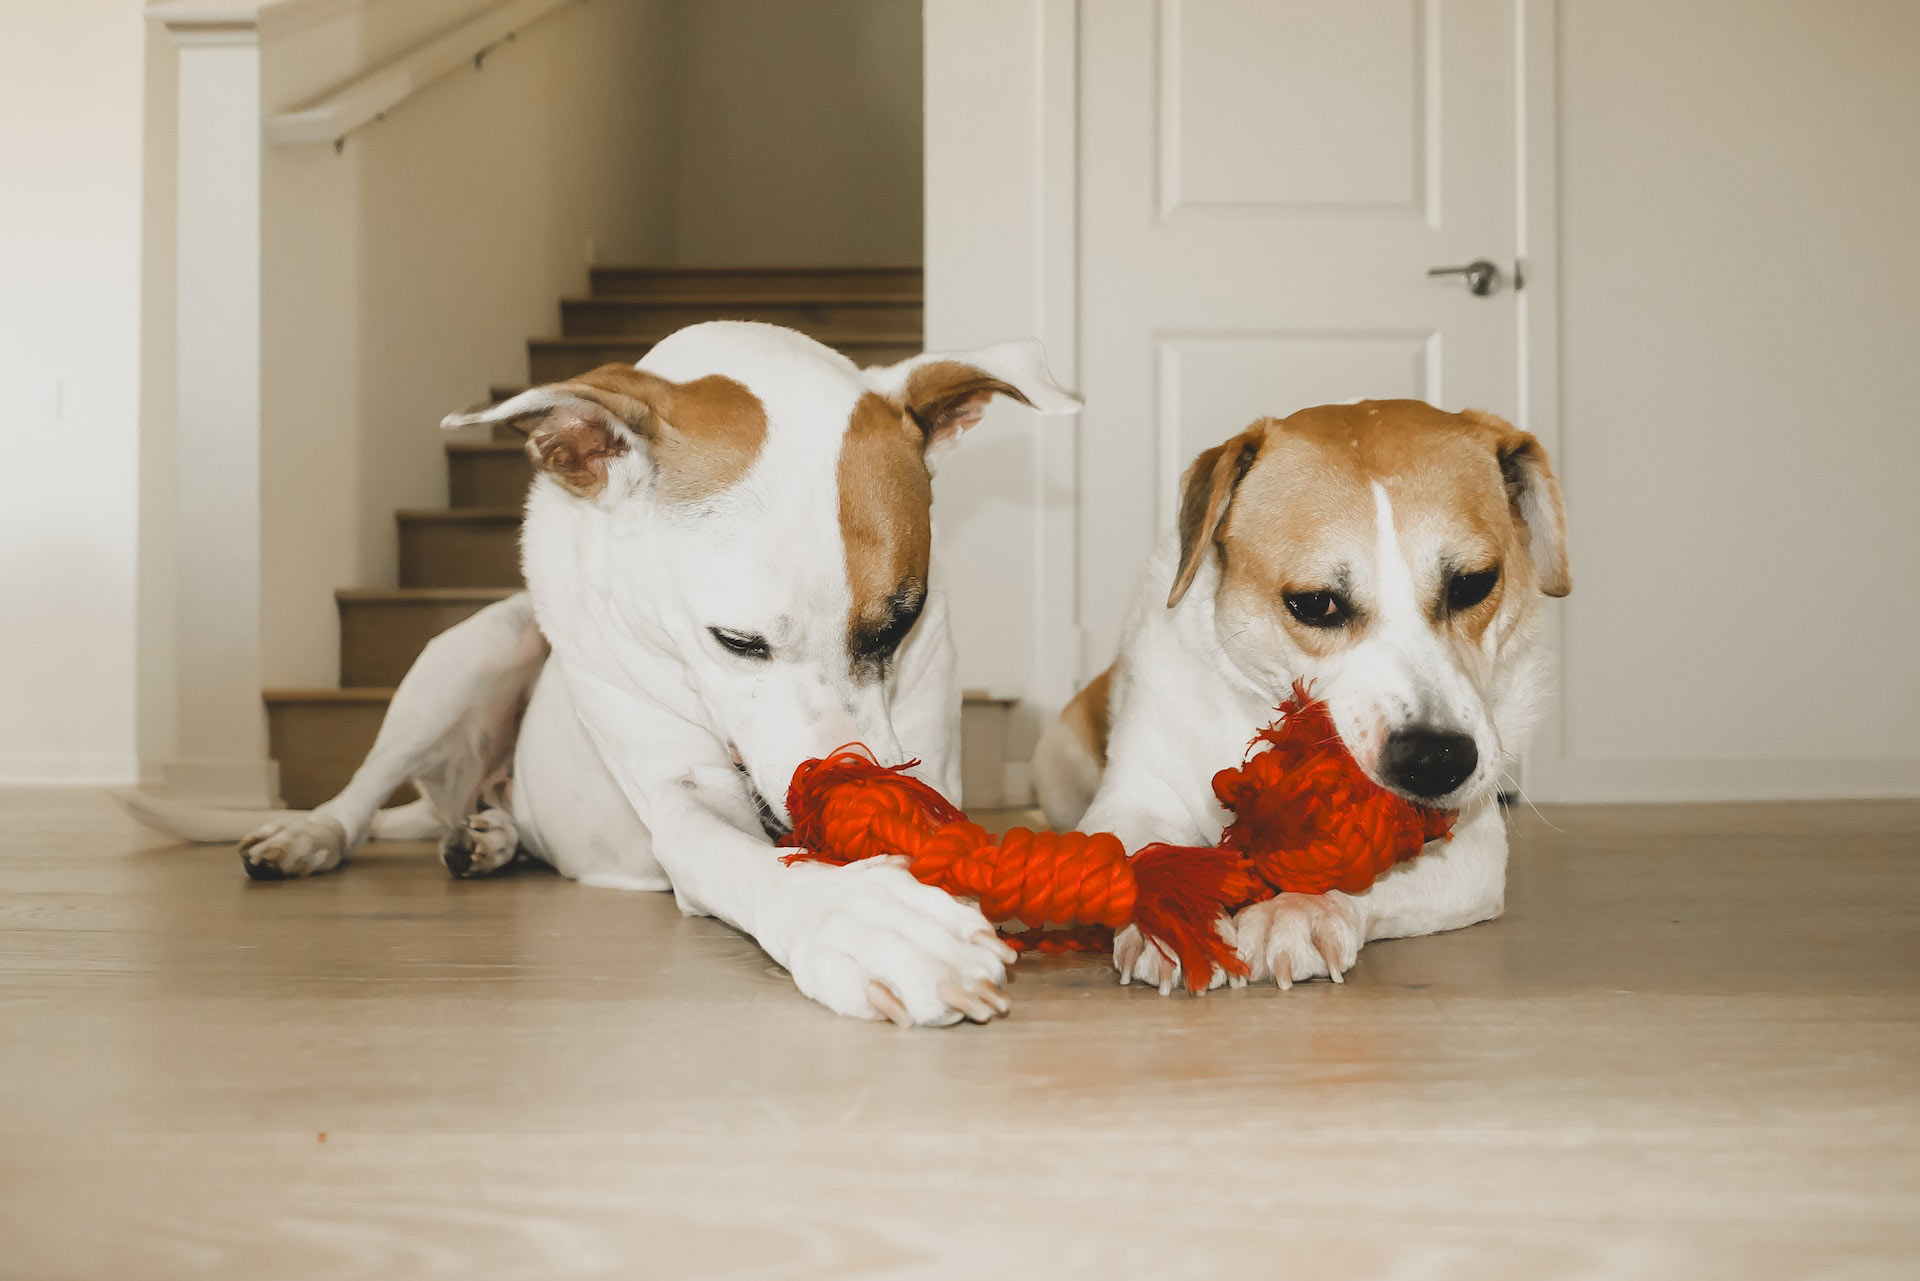 Two dogs lie down on the floor with a red toy in the room